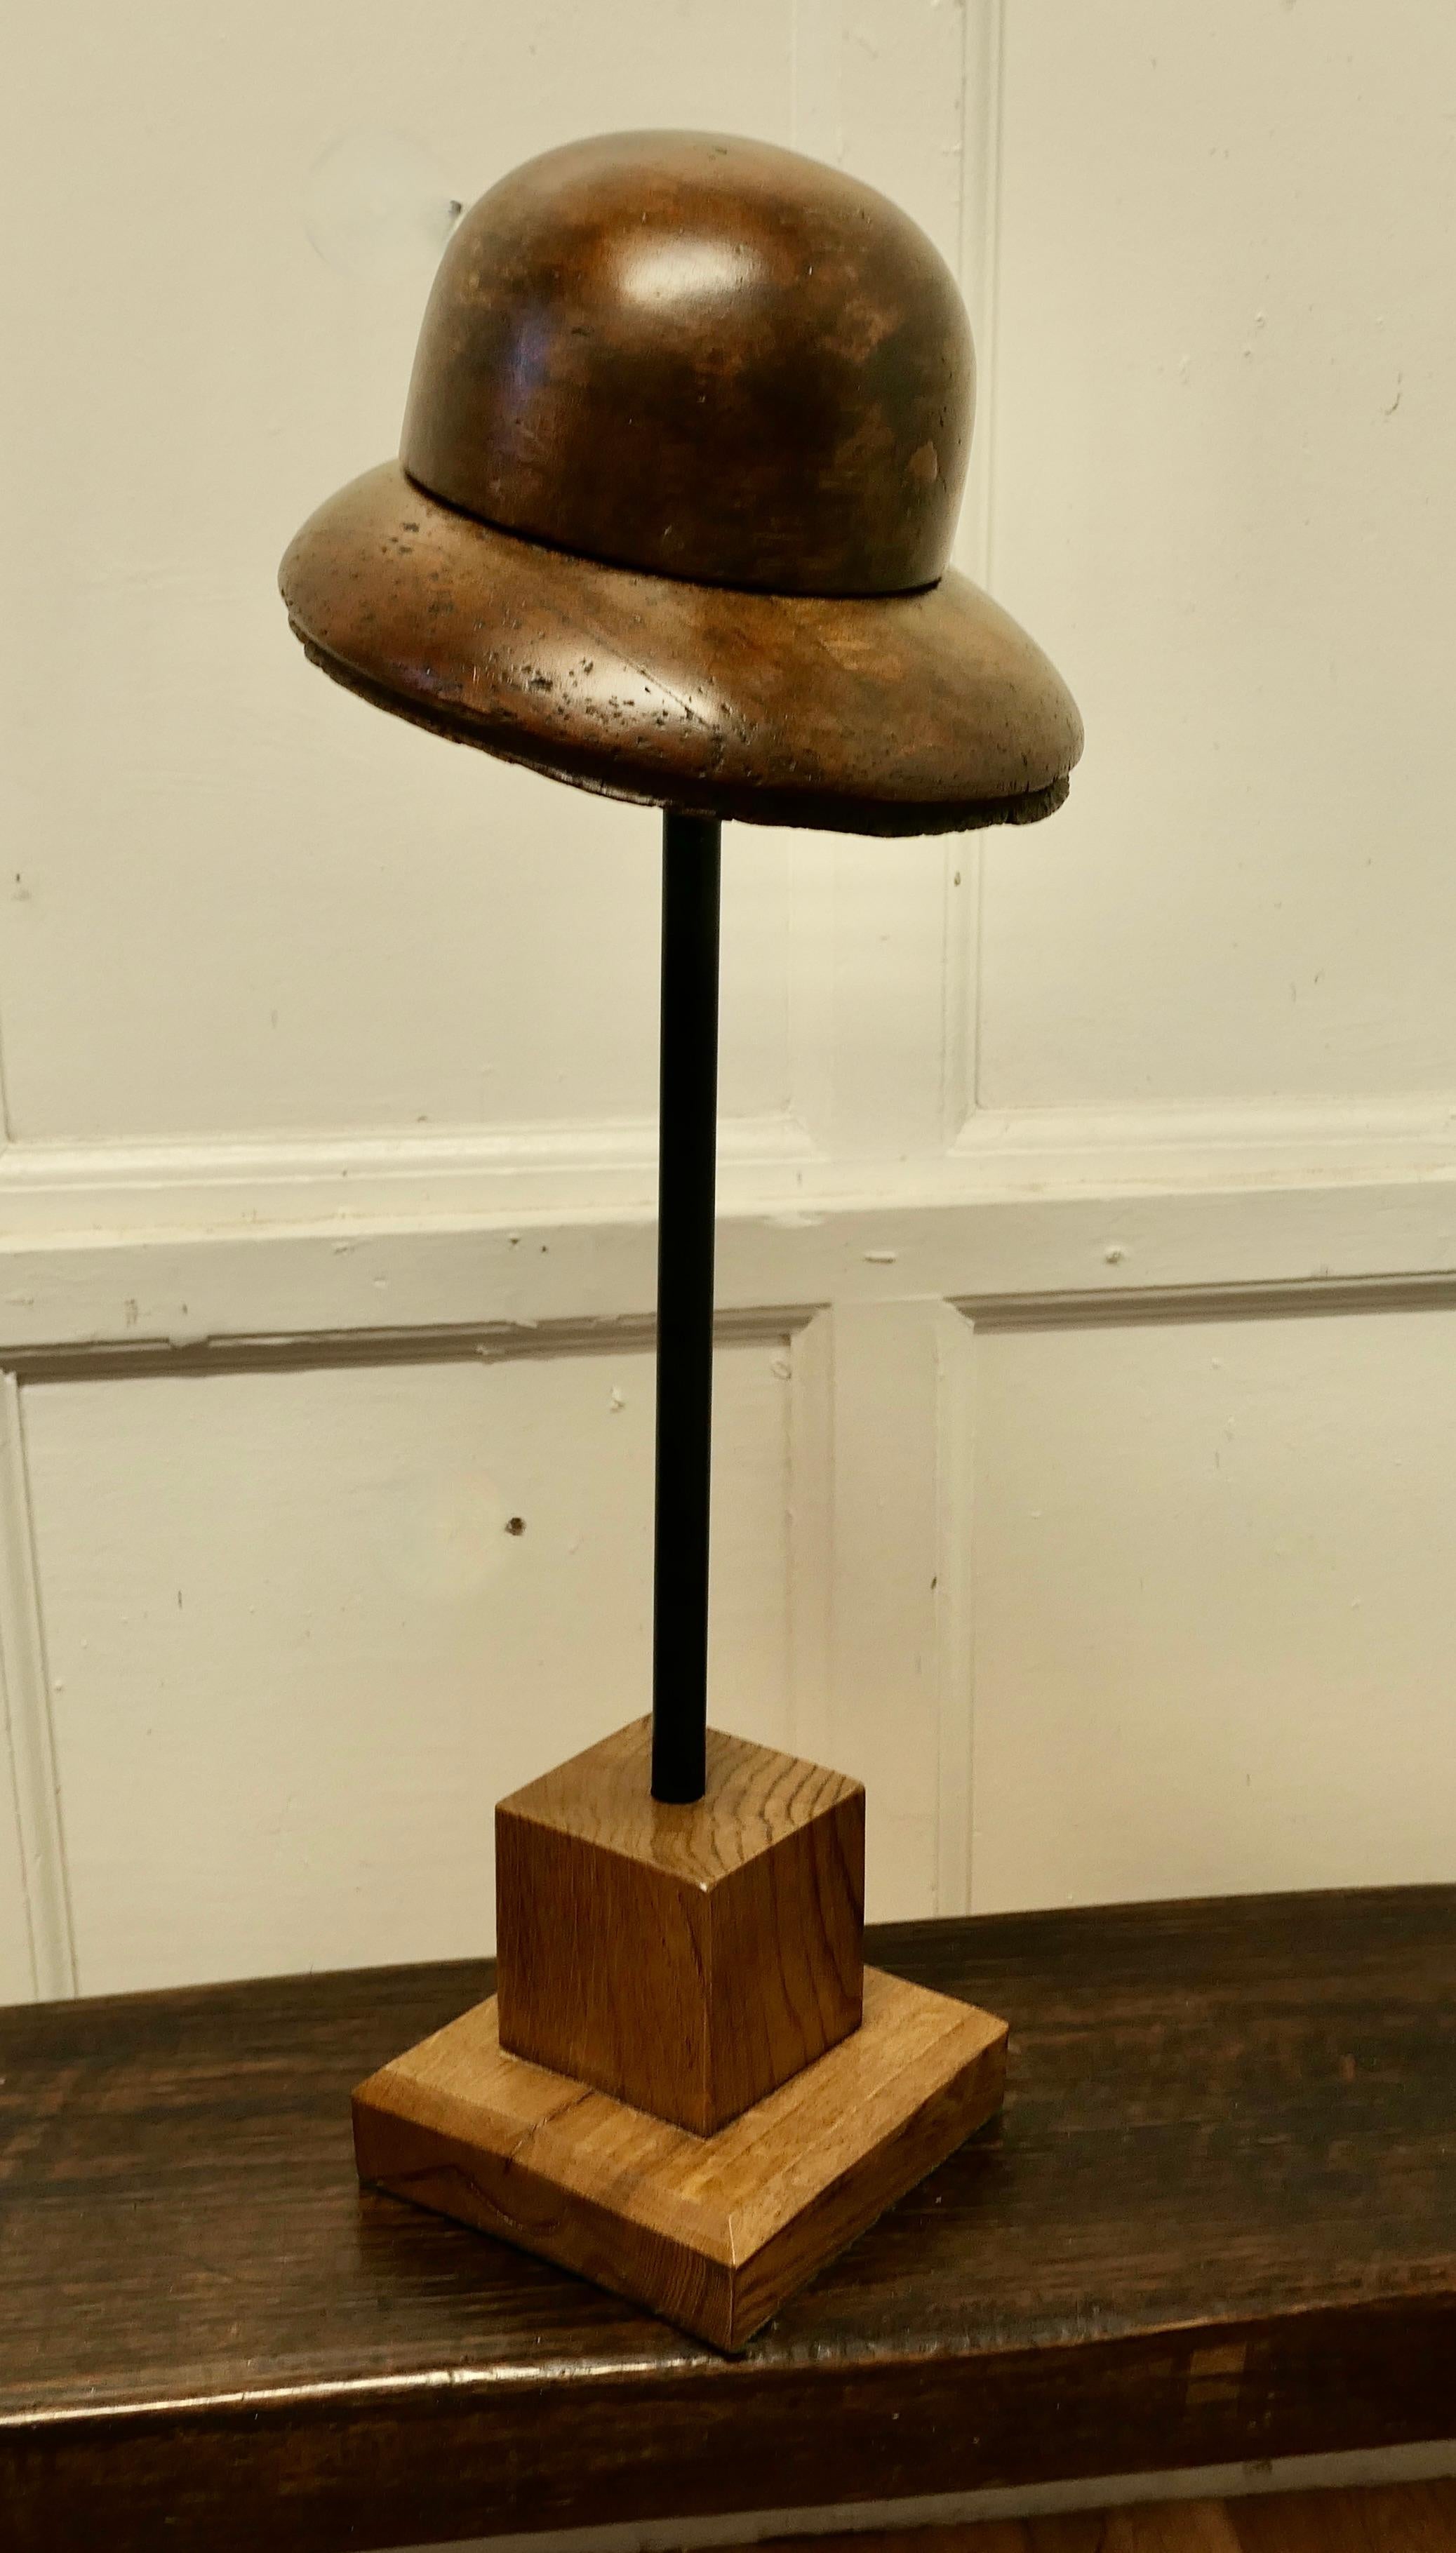 French Fruit Wood Hat Display Stand

This is a form for a 1920s Deep Brim Cloche style hat, with a deep round crown, it is a superbly tactile and very attractive piece. The hat form is made in fruitwood, and it is on a purpose made Ash base, all in